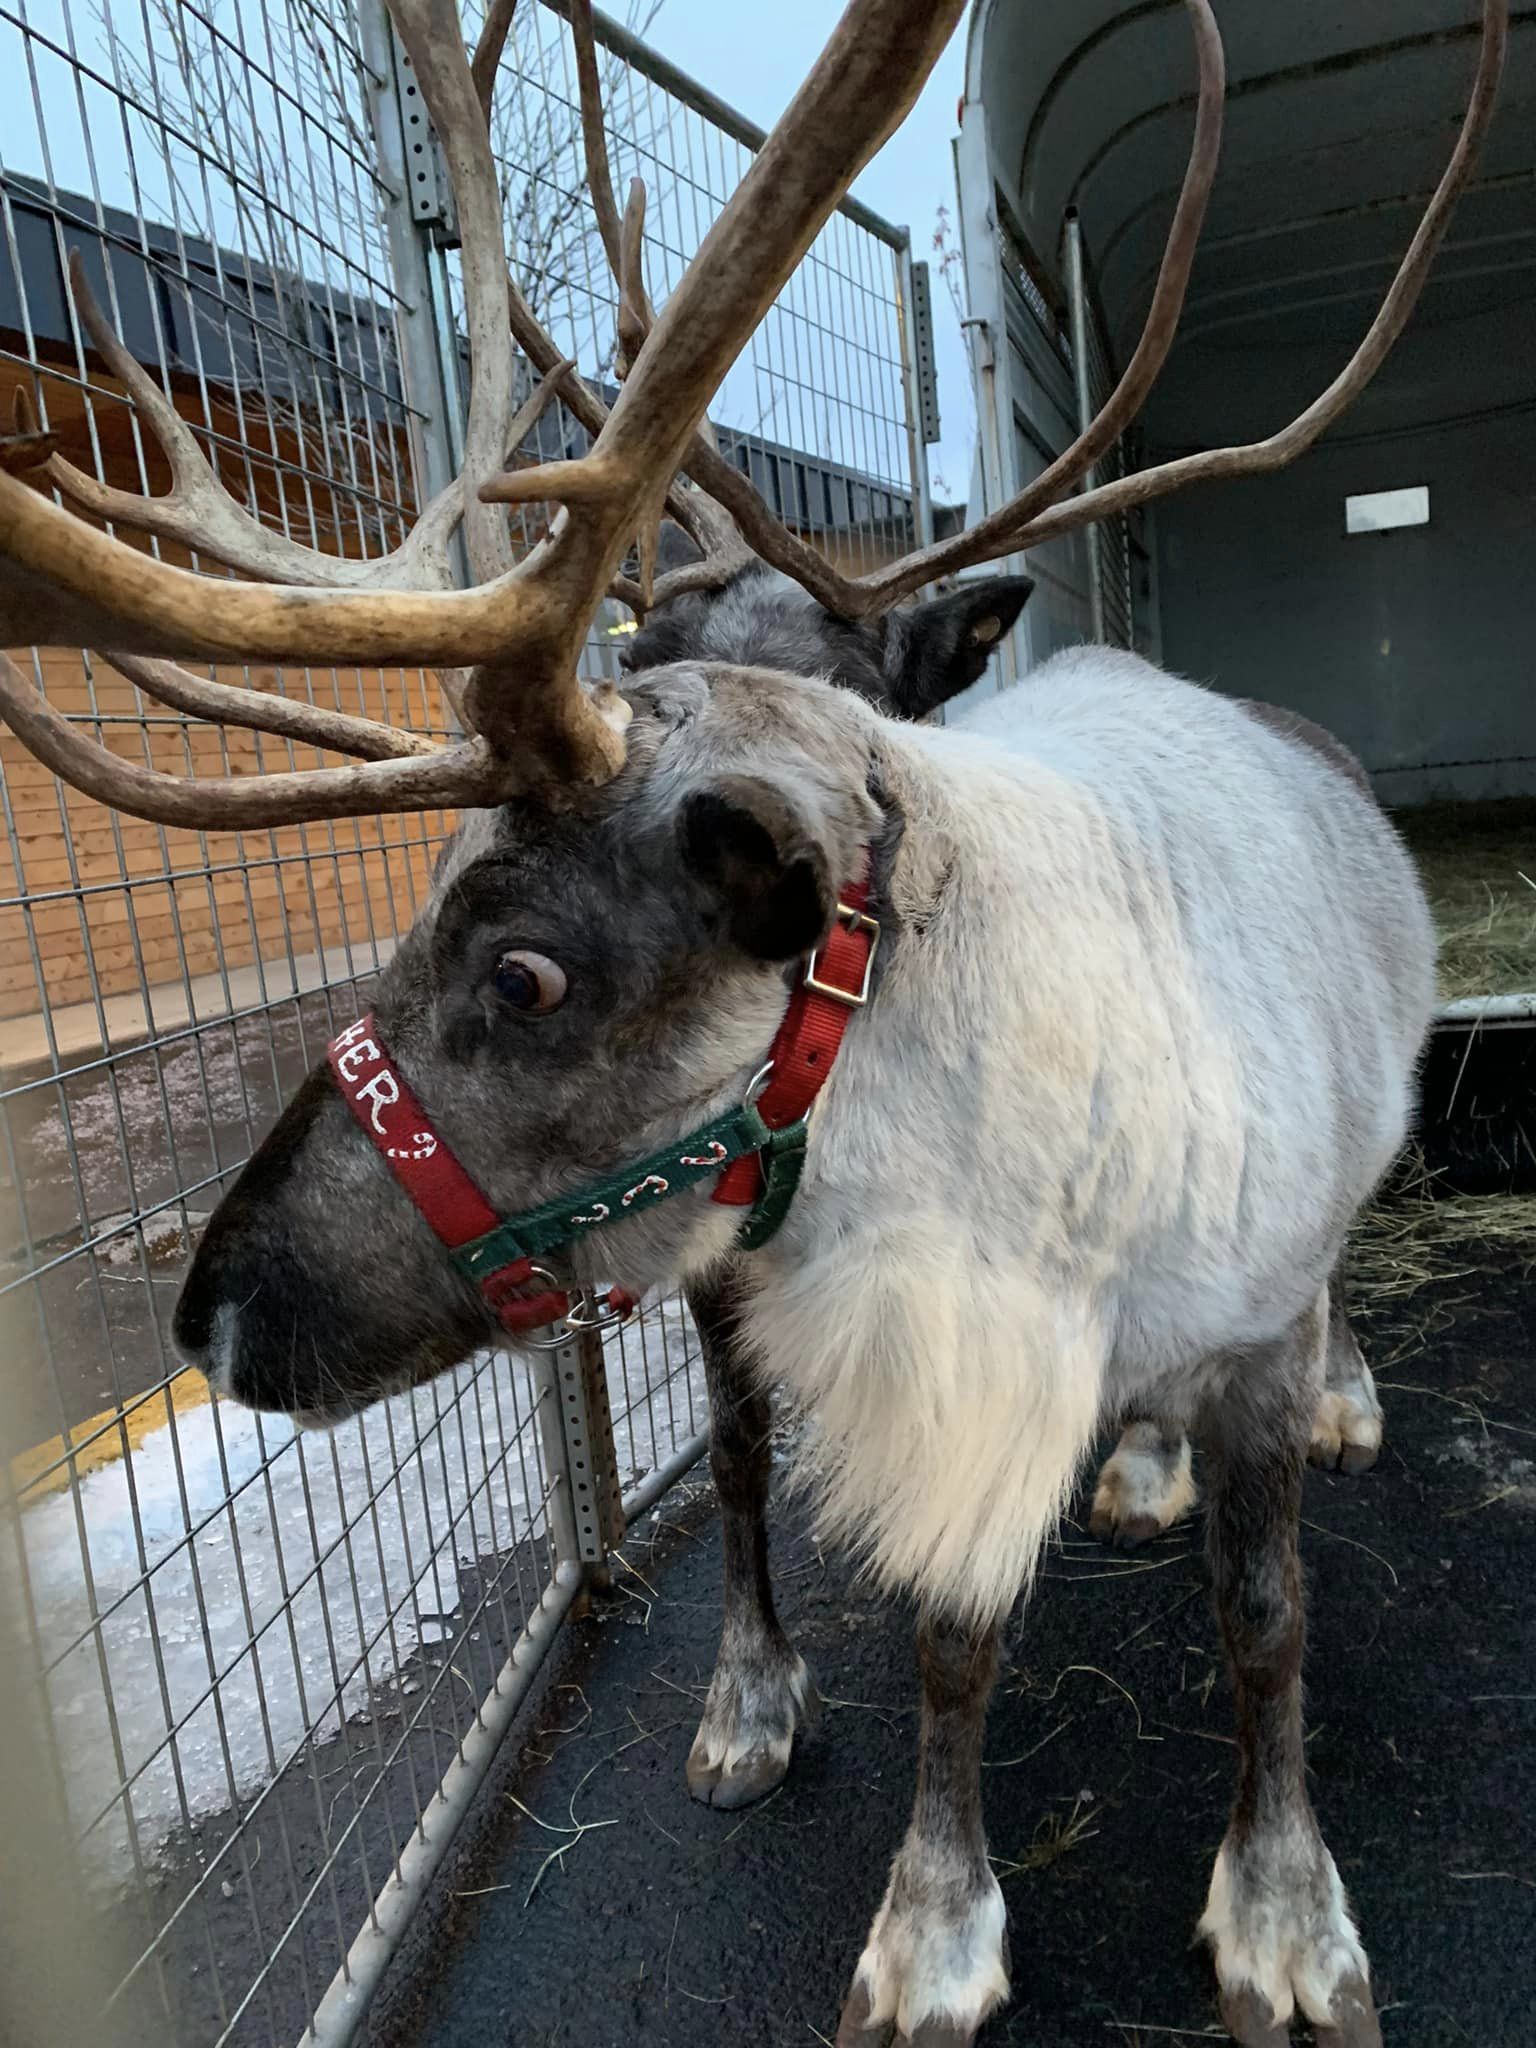 Reindeer from Timberview farm